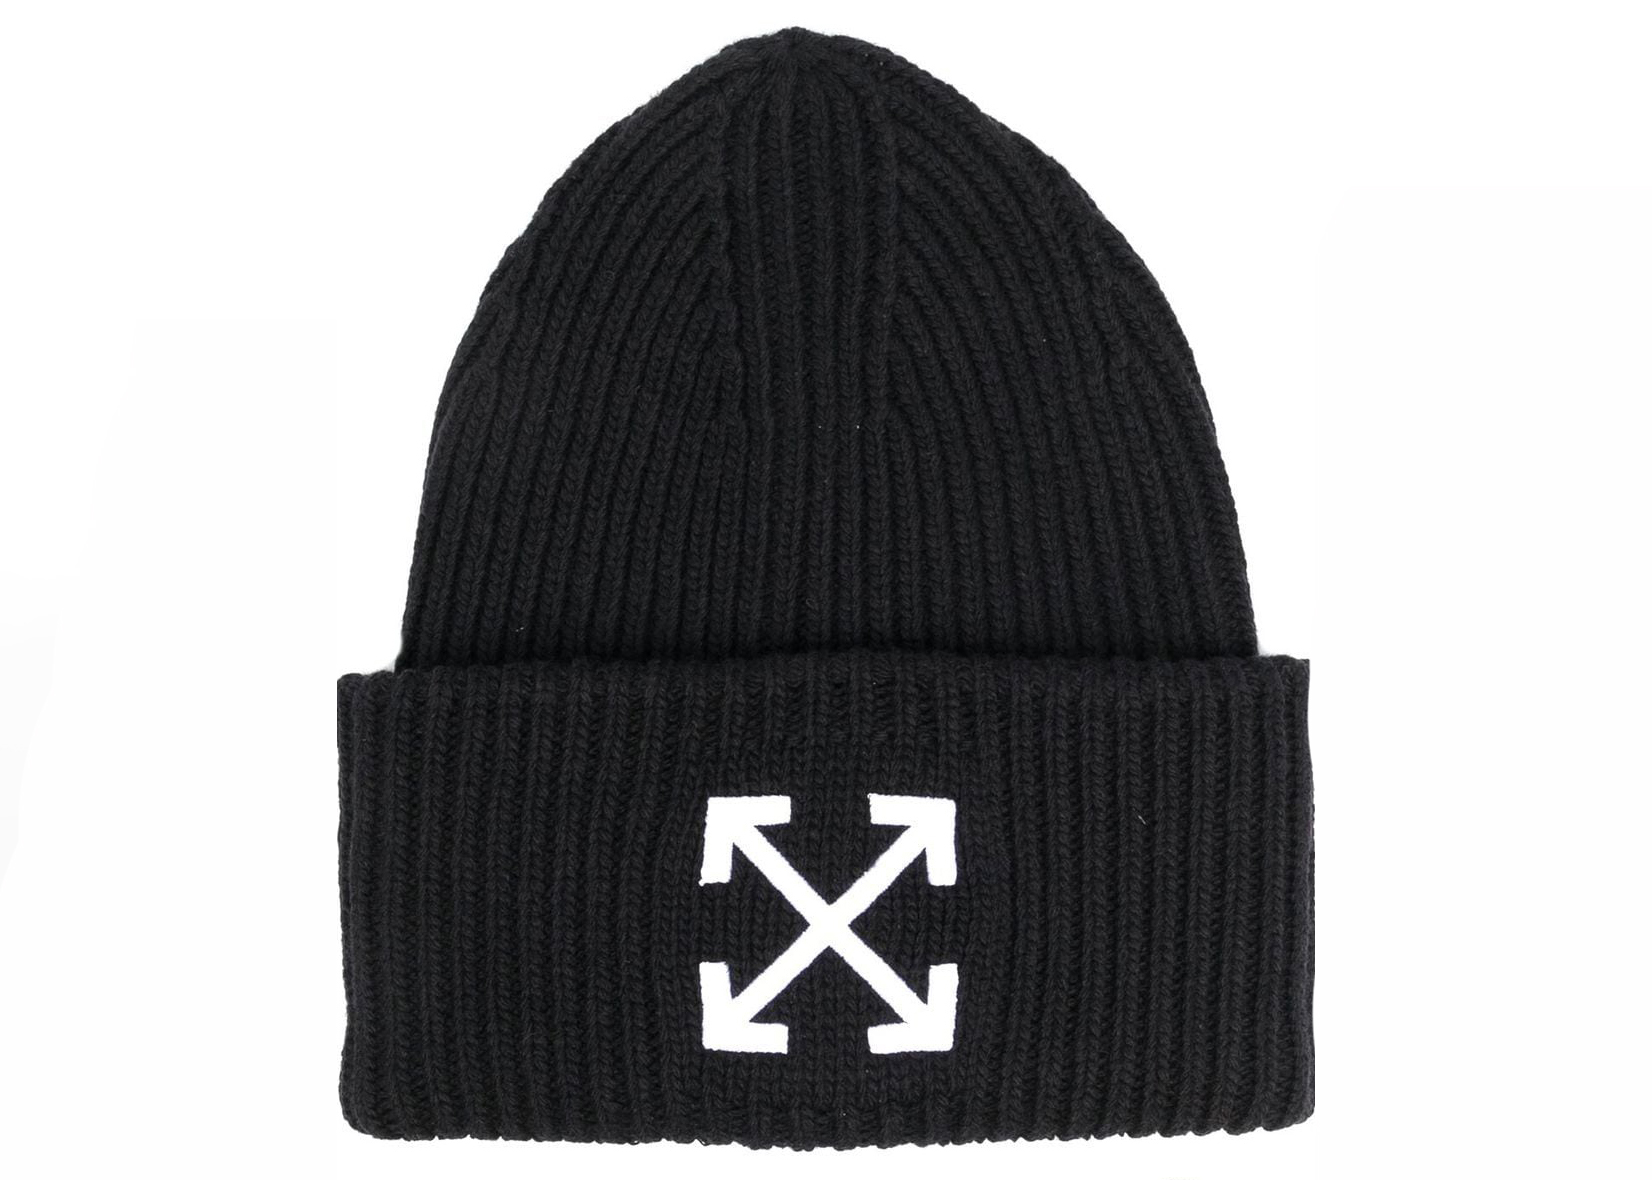 OFF-WHITE Arrow Motif Embroidered Beanie Black/White in Wool - US